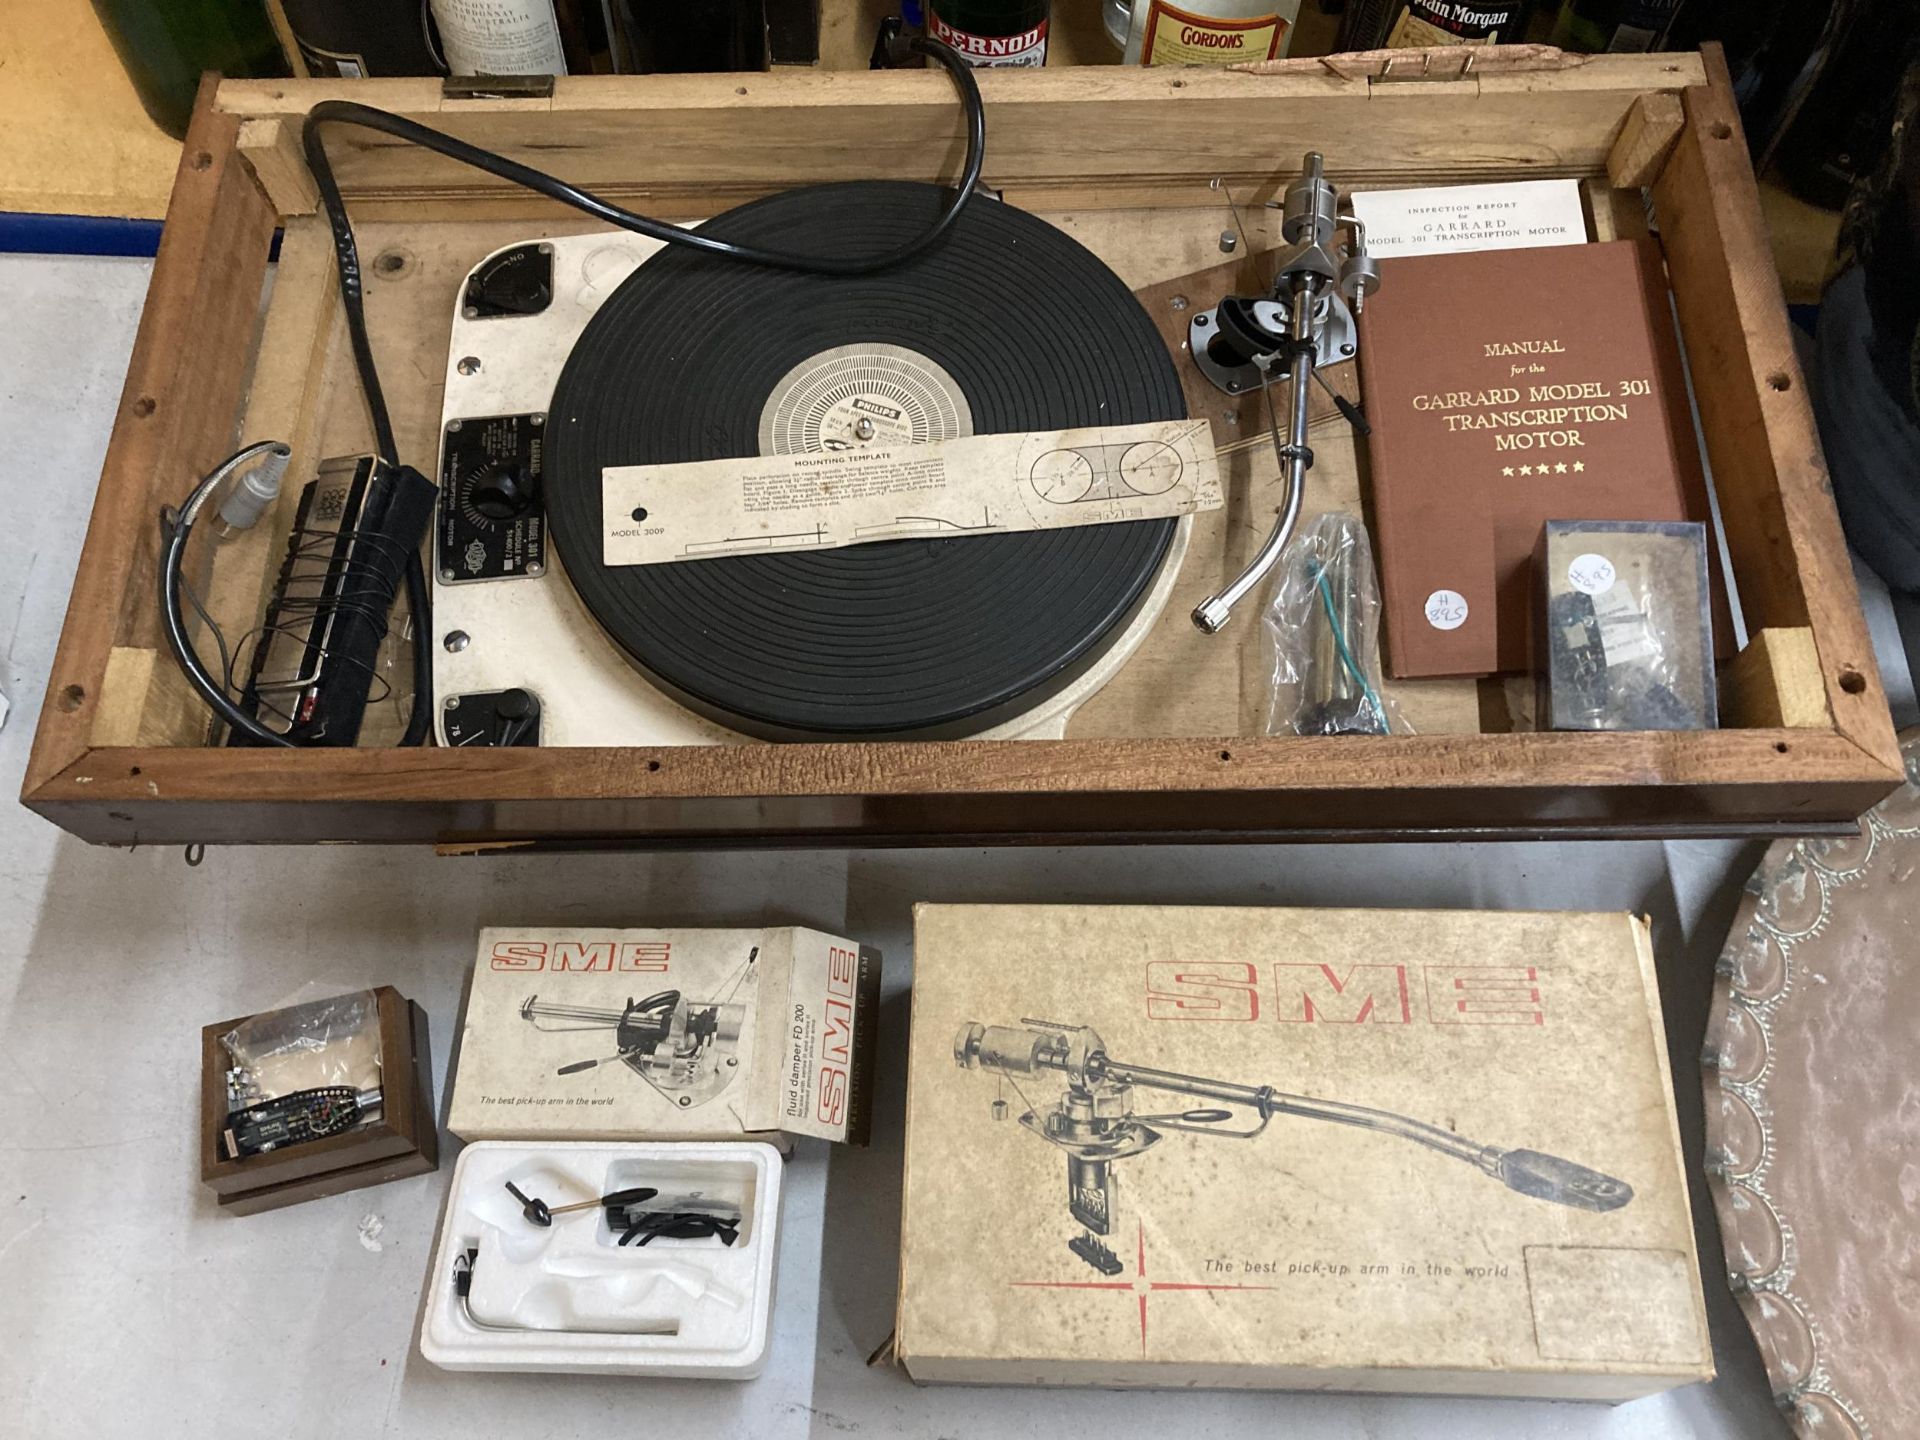 A GARRARD 301 TURNTABLE WITH INSTRUCTION, INSPECTION REPORT BOOK 3009 SME ARM, HEAD TYPE II IN